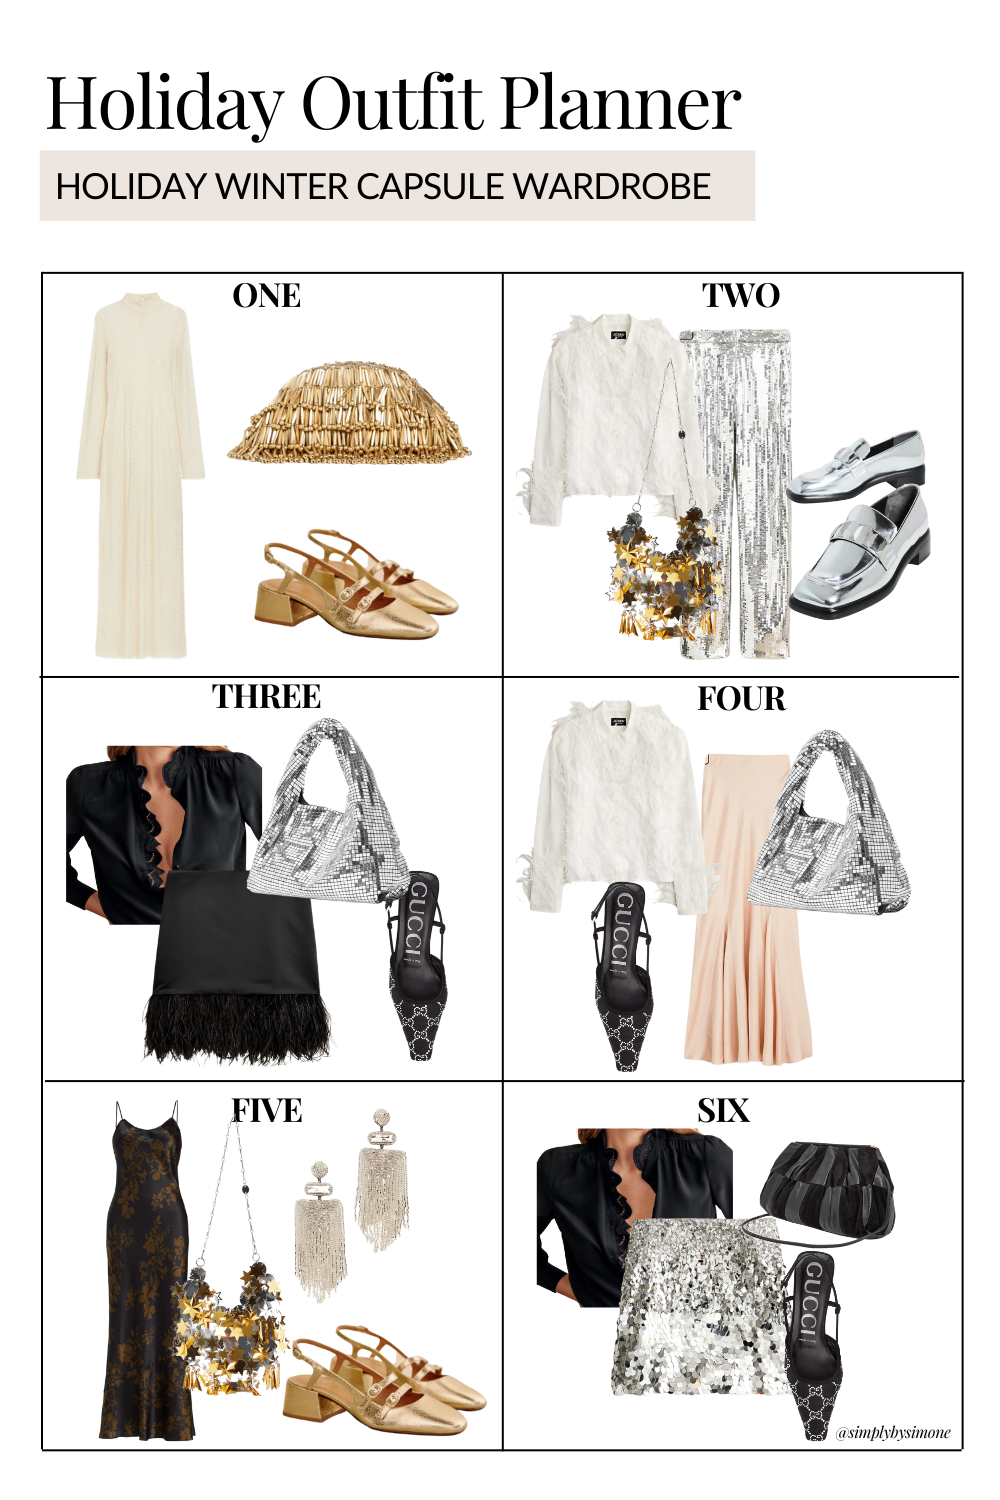 Holiday Winter Capsule Wardrobe Guide | How To Build Your Holiday Wear | Holiday Winter Outfits | Holiday Winter Aesthetic | Holiday Winter Party Outfit | Winter Holiday Capsule Wardrobe | Winter Holiday Capsule | Holiday Capsule Wardrobe Winter Travel | Winter Pinterest Outfits | Winter Outfits | Christmas Party Outfit Ideas | What To Wear This Holiday 2023 | Outfit Planner | Simply by Simone